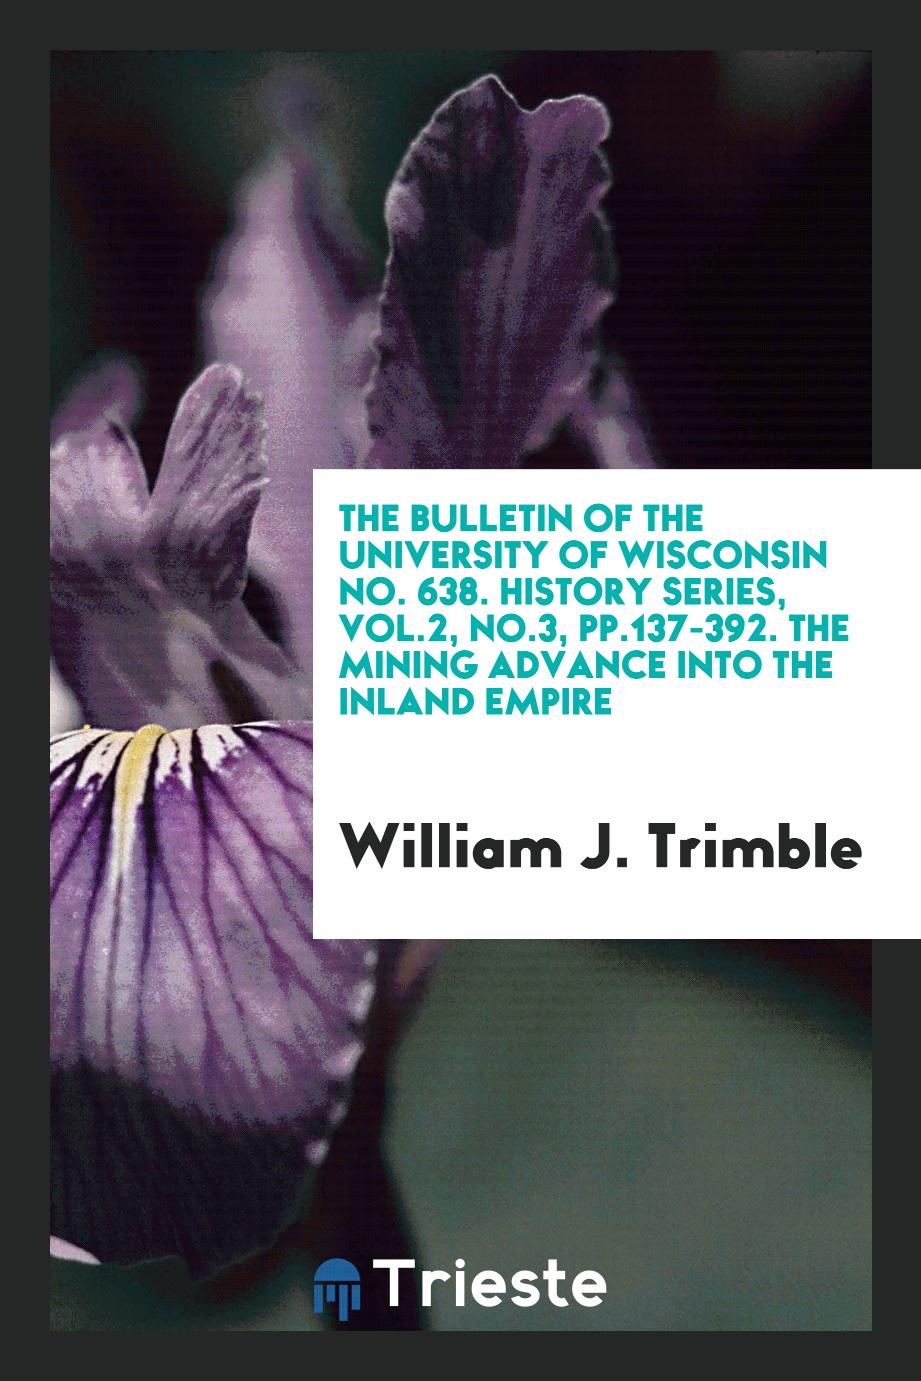 The bulletin of the university of Wisconsin No. 638. History series, Vol.2, No.3, pp.137-392. The mining advance into the inland empire